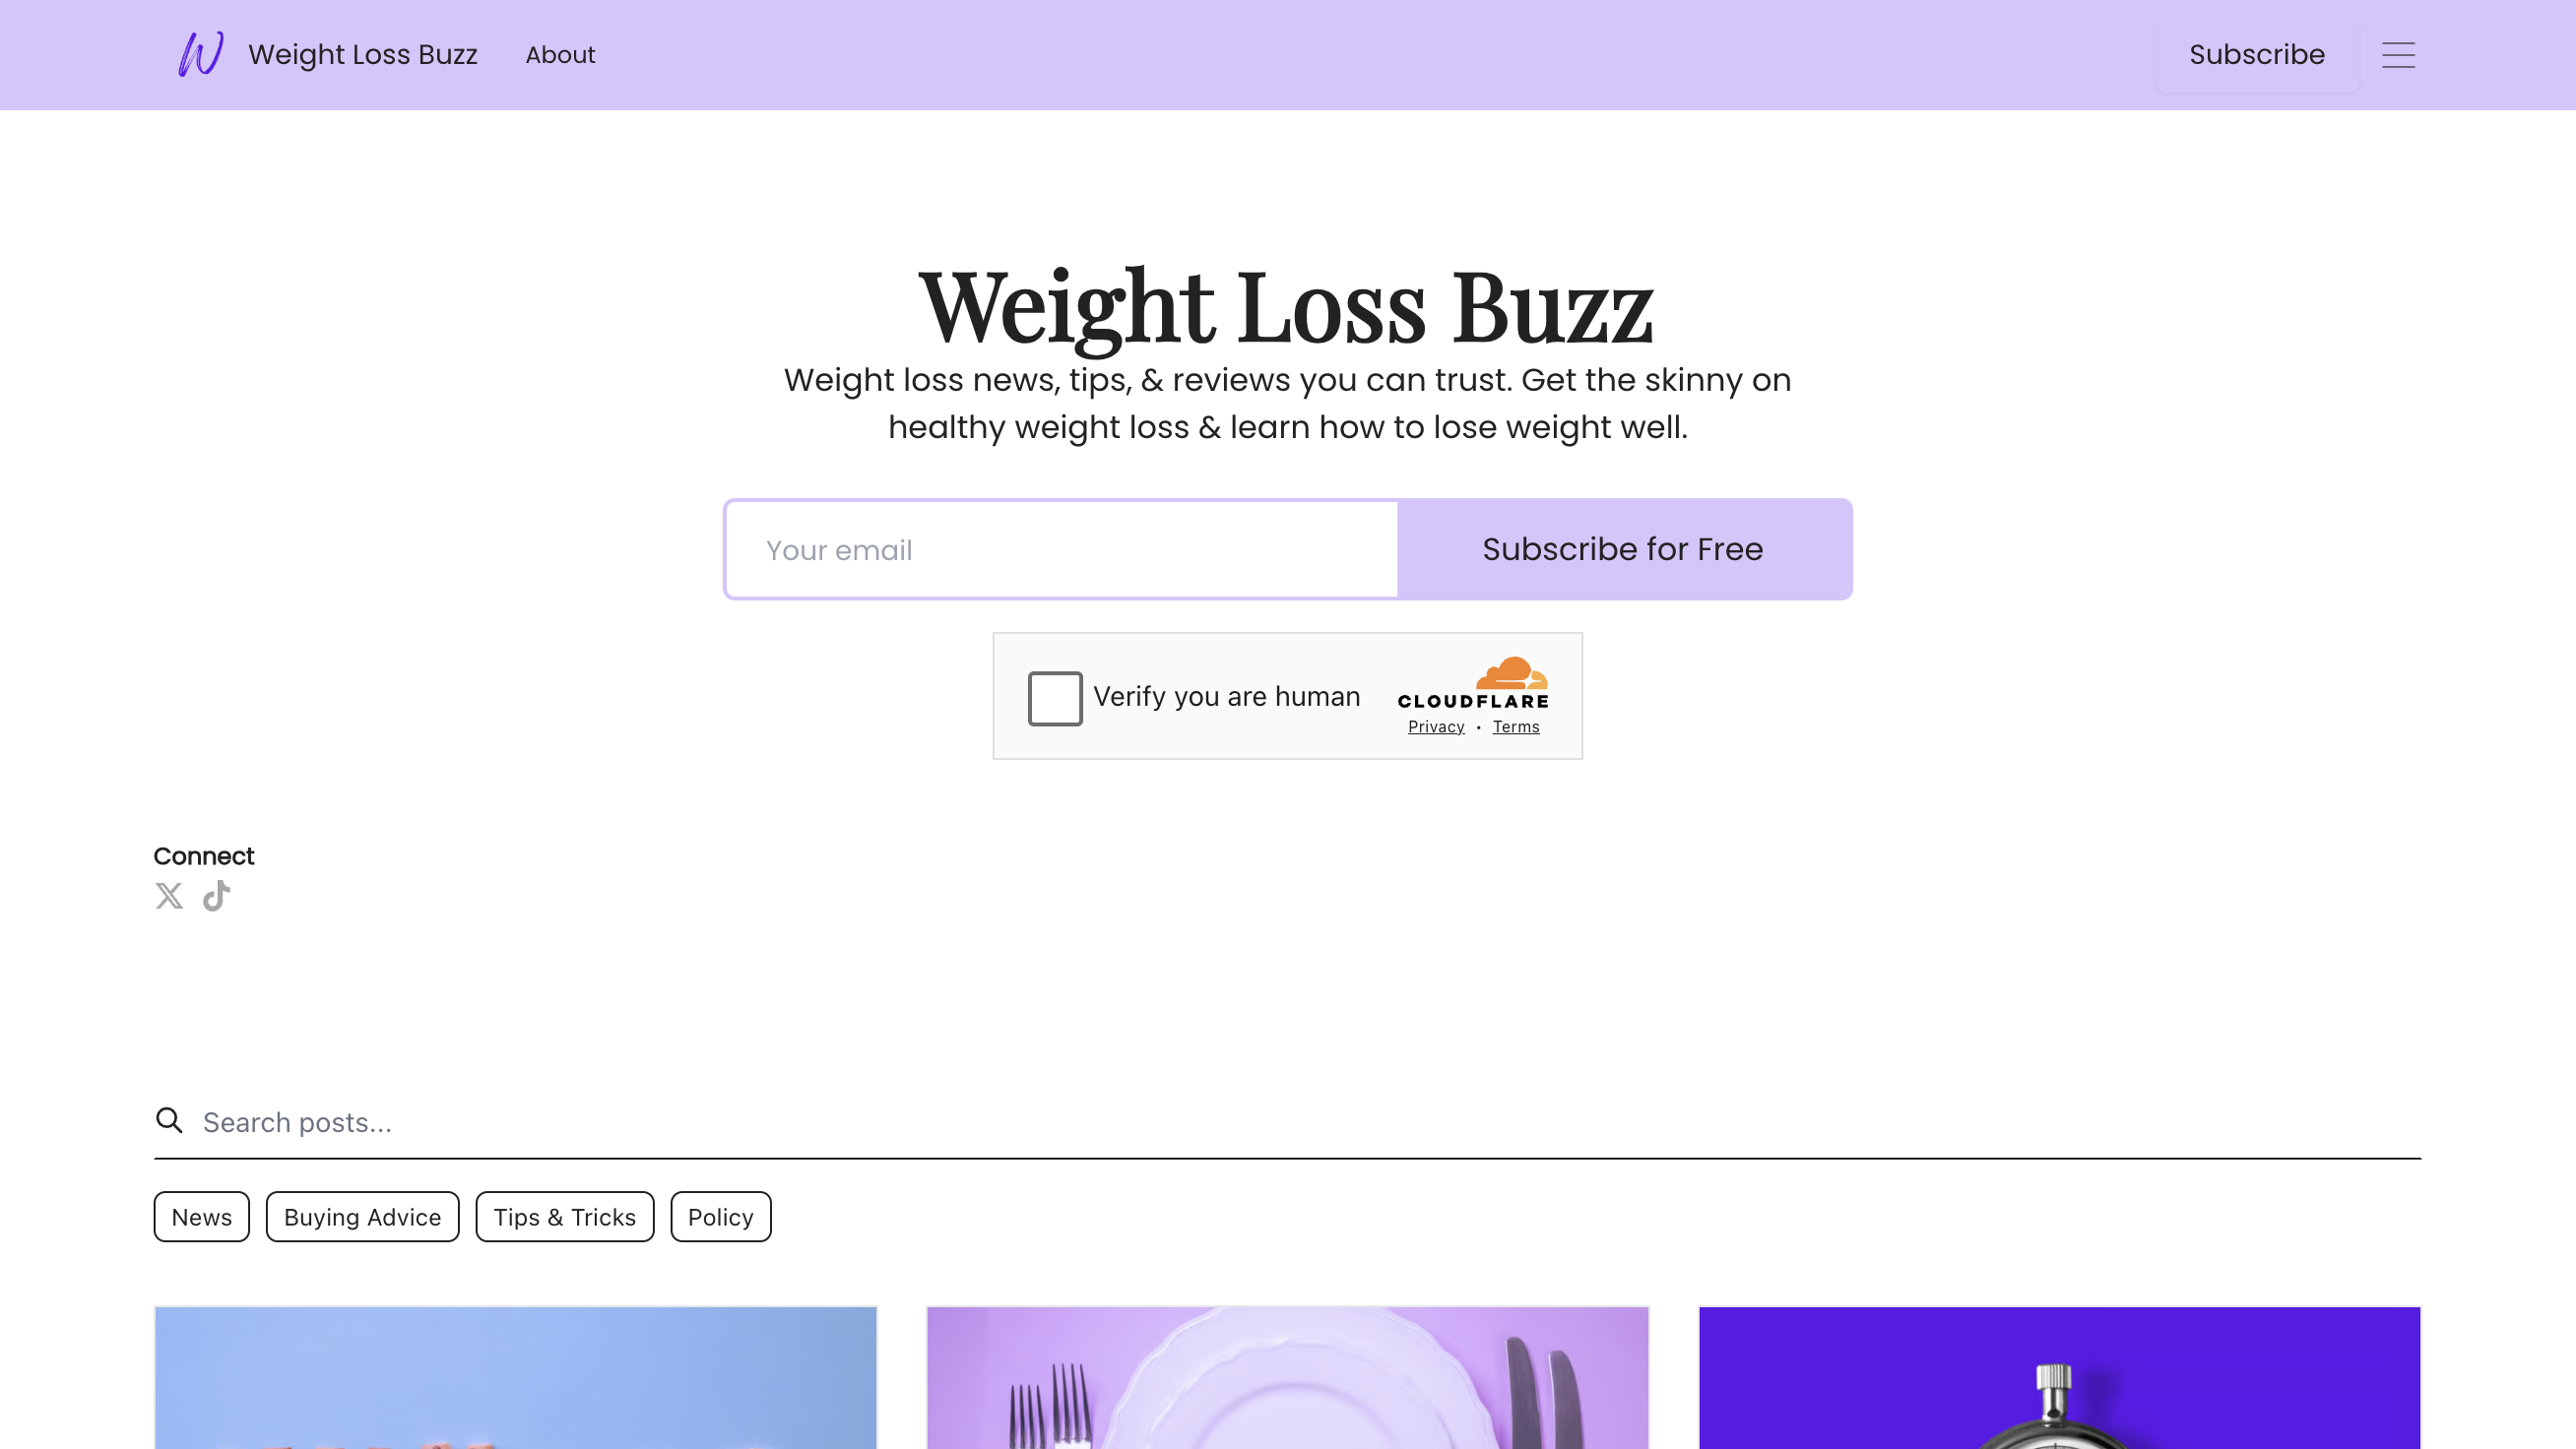 Weight Loss Buzz homepage